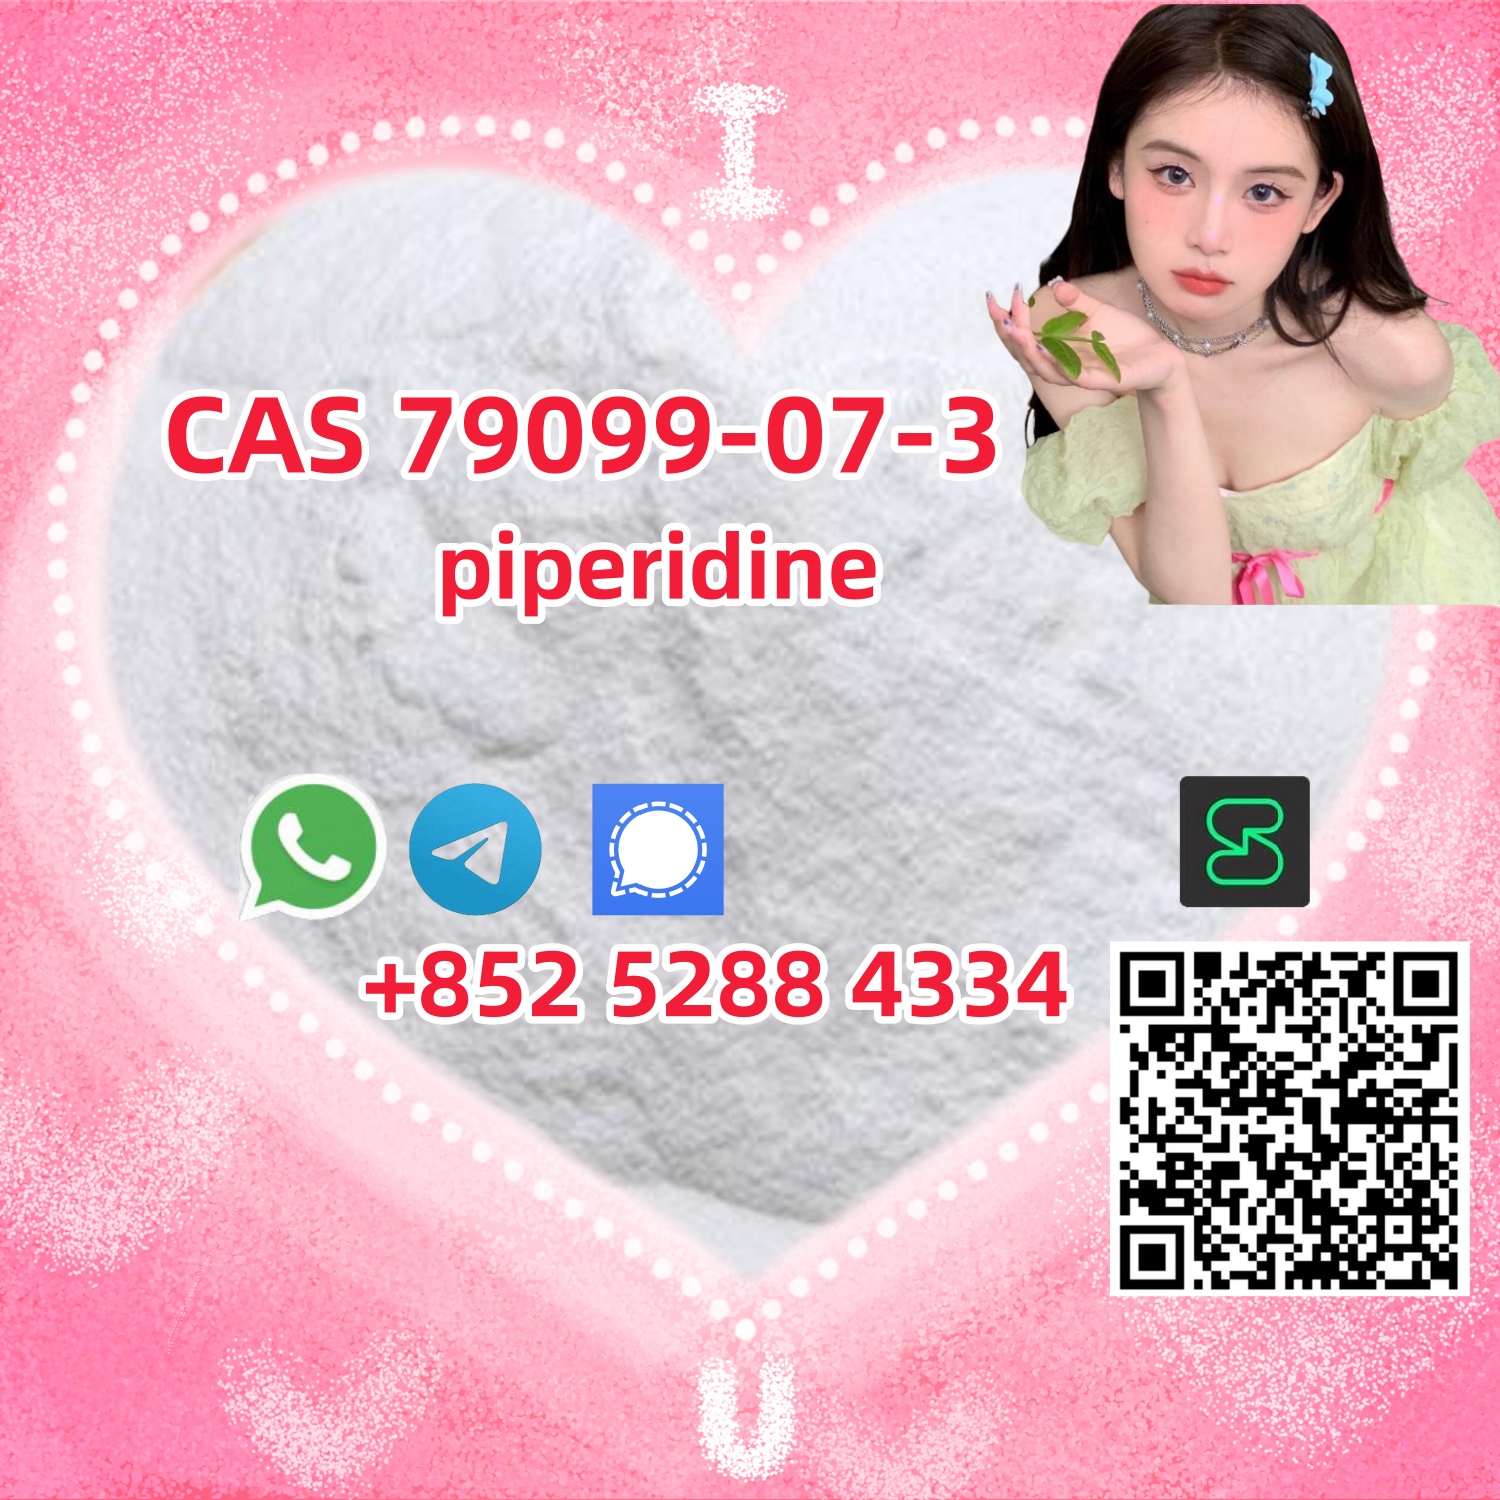 Sell high quality piperidine CAS 79099-07-3,un,Sports & Hobbies,Gym - Fitness,77traders